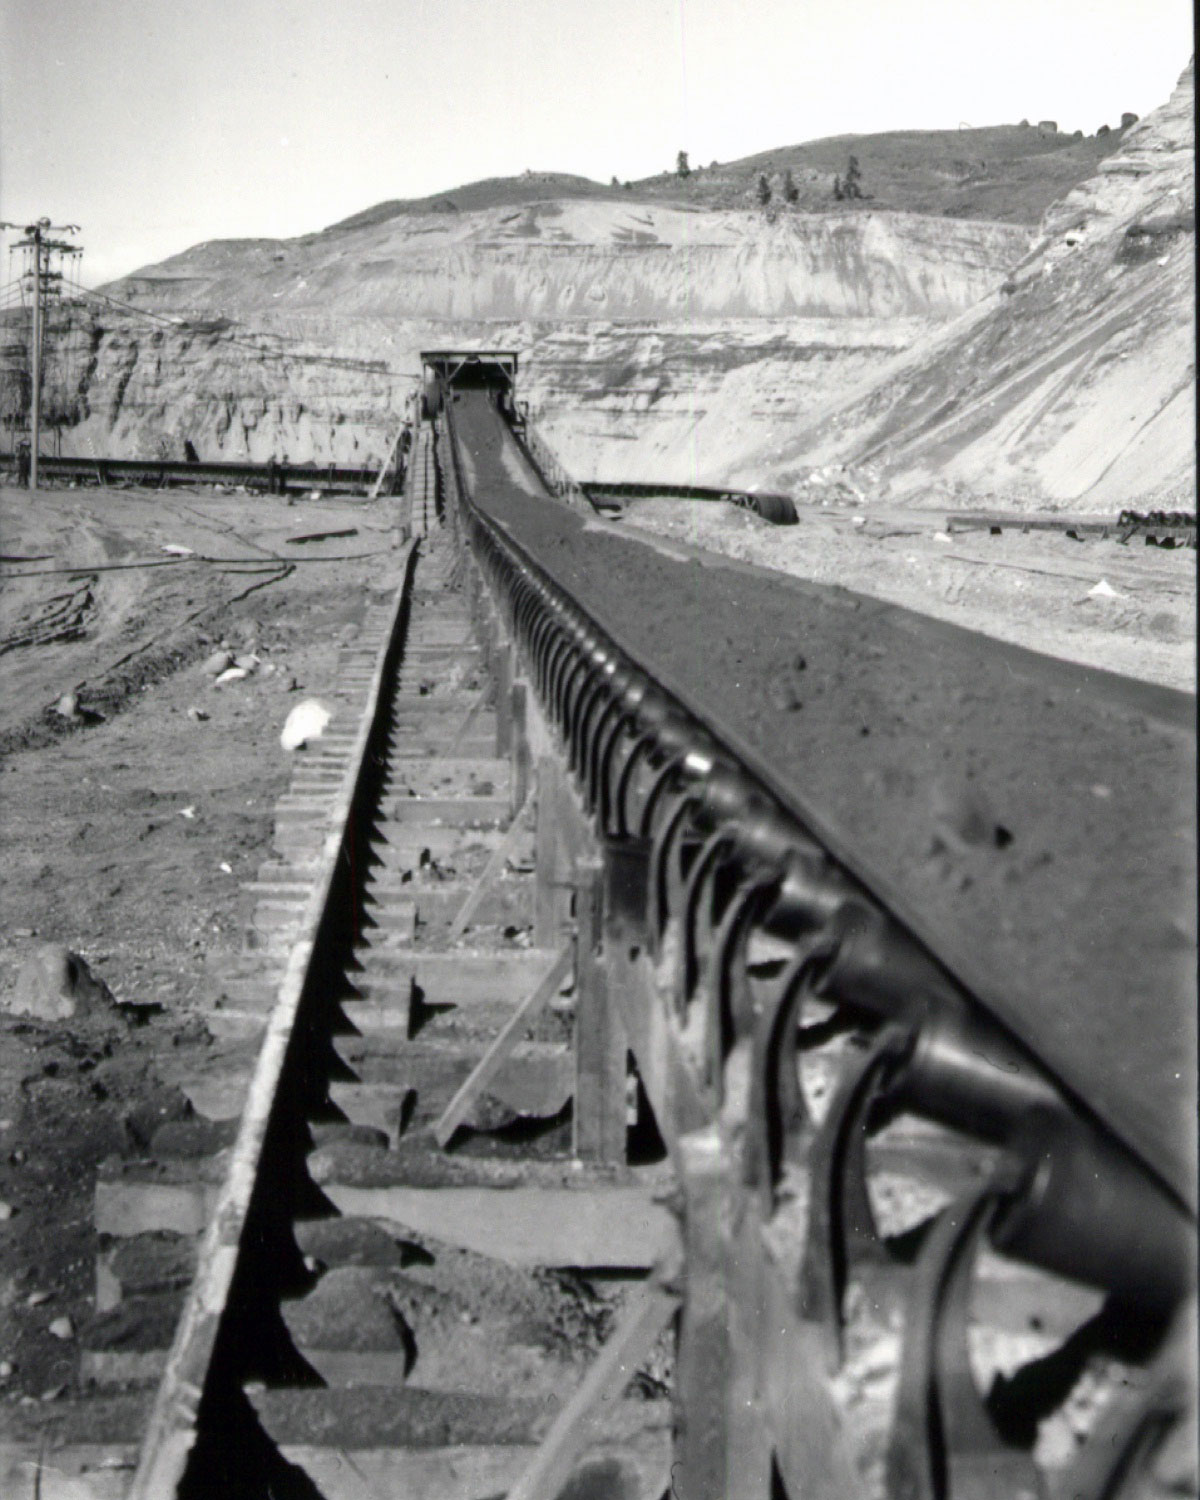 MWAK builds a huge conveyor belt—the world’s largest—to remove all the rocks and rubble from the excavation site. It is more than a mile long! 

Mason-Walsh-Atkinson-Kier (MWAK) is the name of the company that built the foundation for the dam.